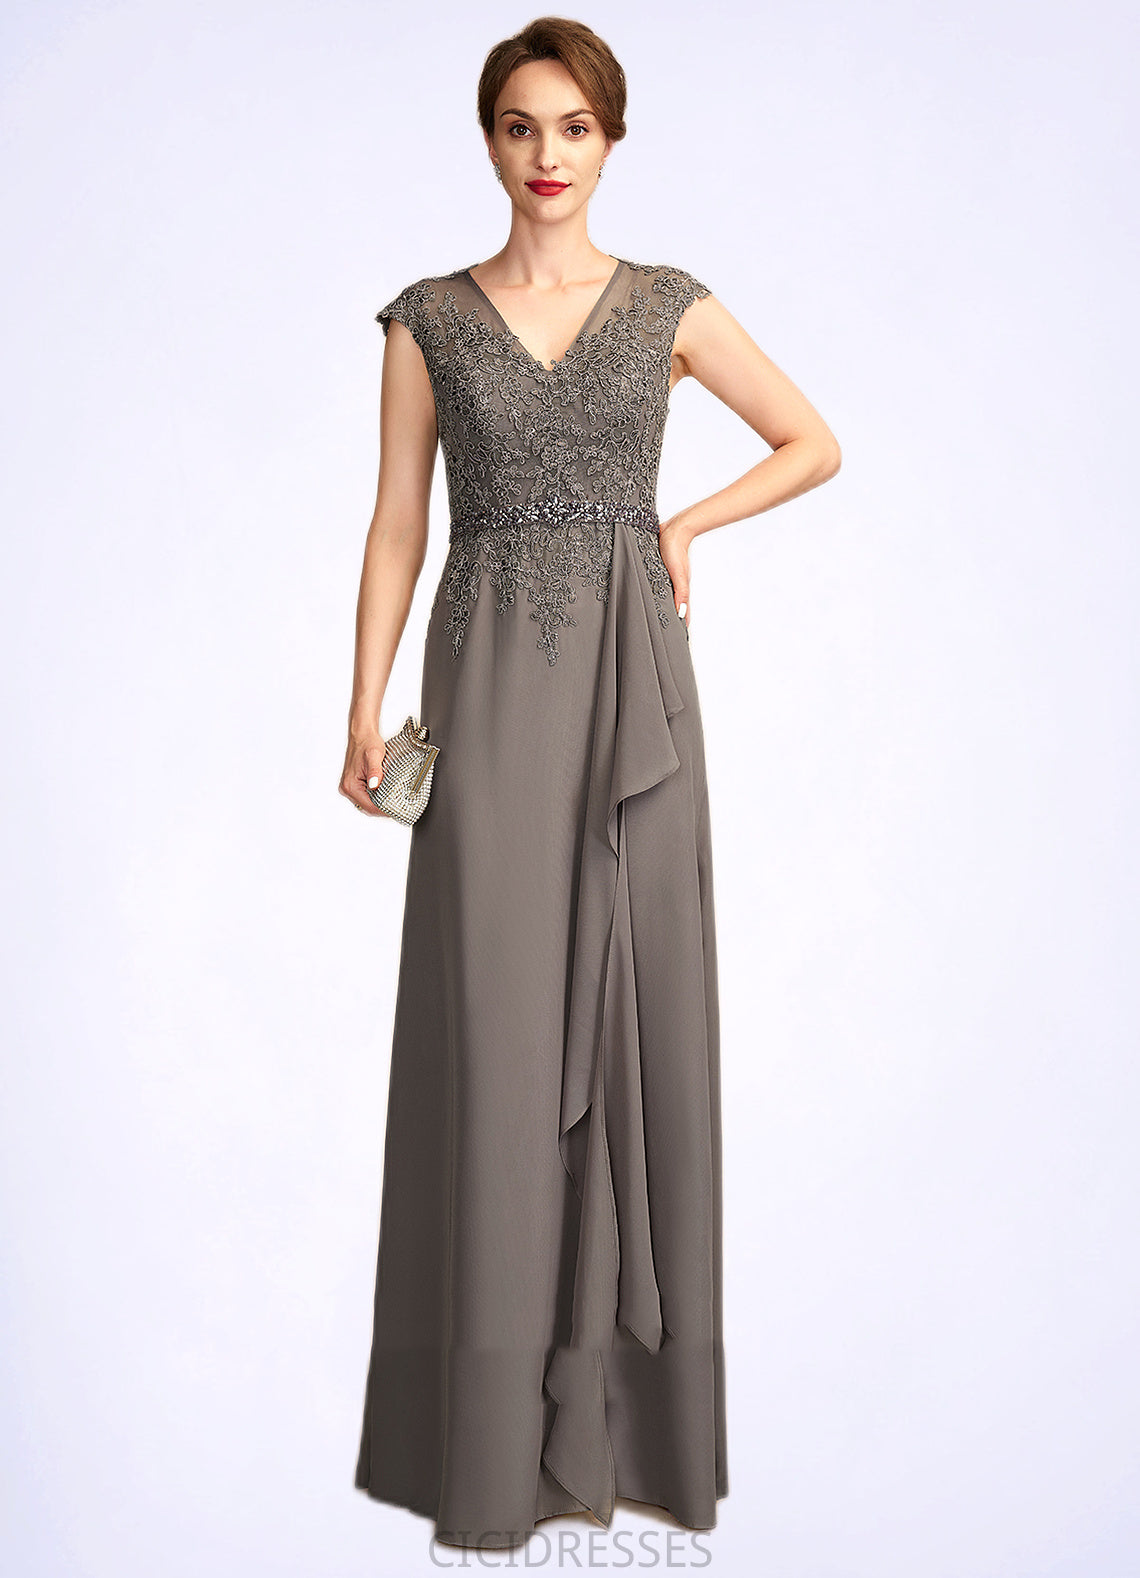 Jenny A-Line V-neck Floor-Length Chiffon Lace Mother of the Bride Dress With Beading Sequins Cascading Ruffles CIC8126P0015030